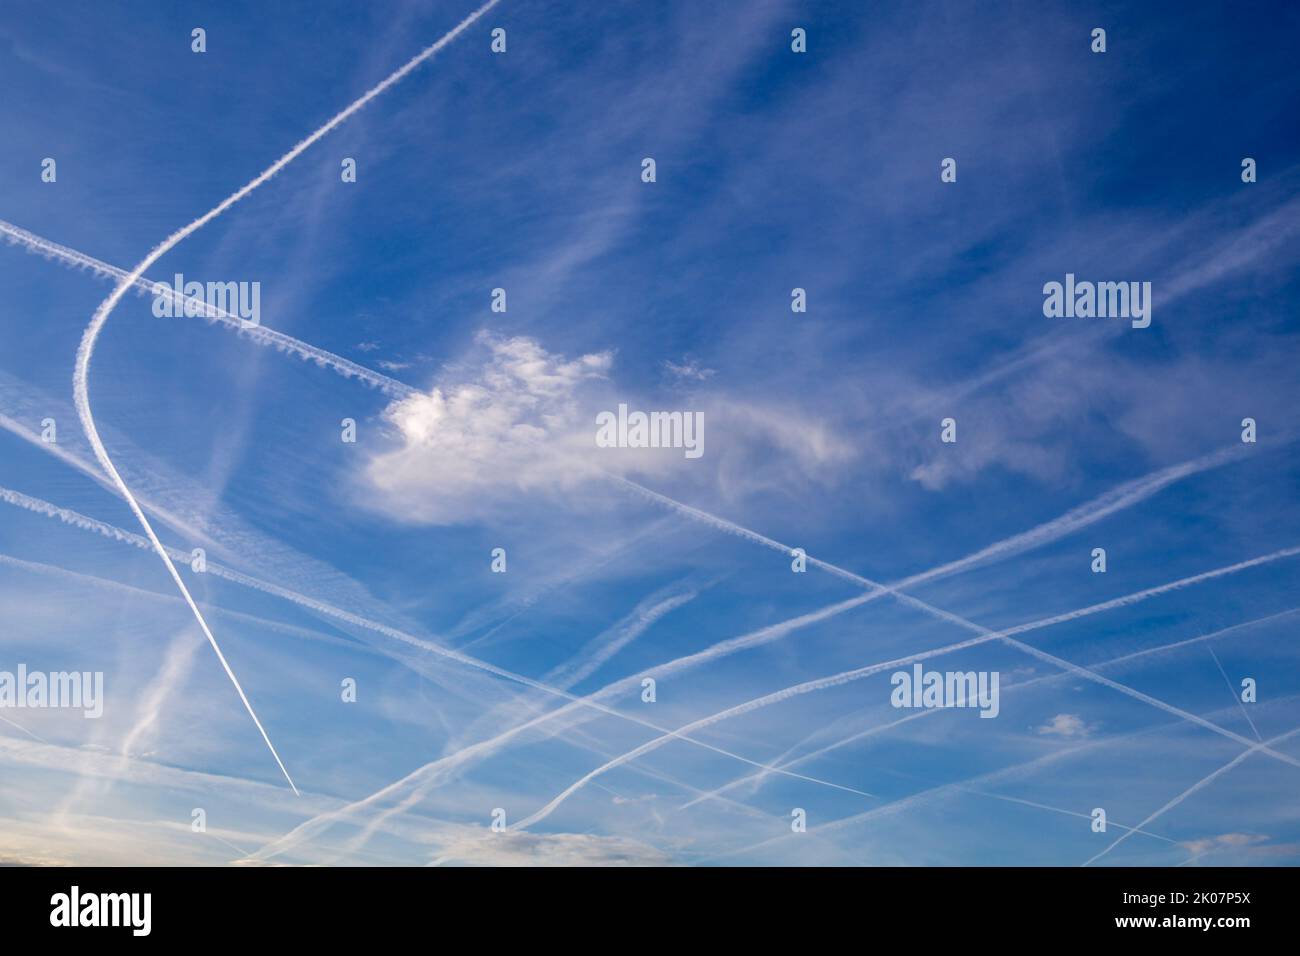 Blue sky with many contrails or chemtrails Stock Photo